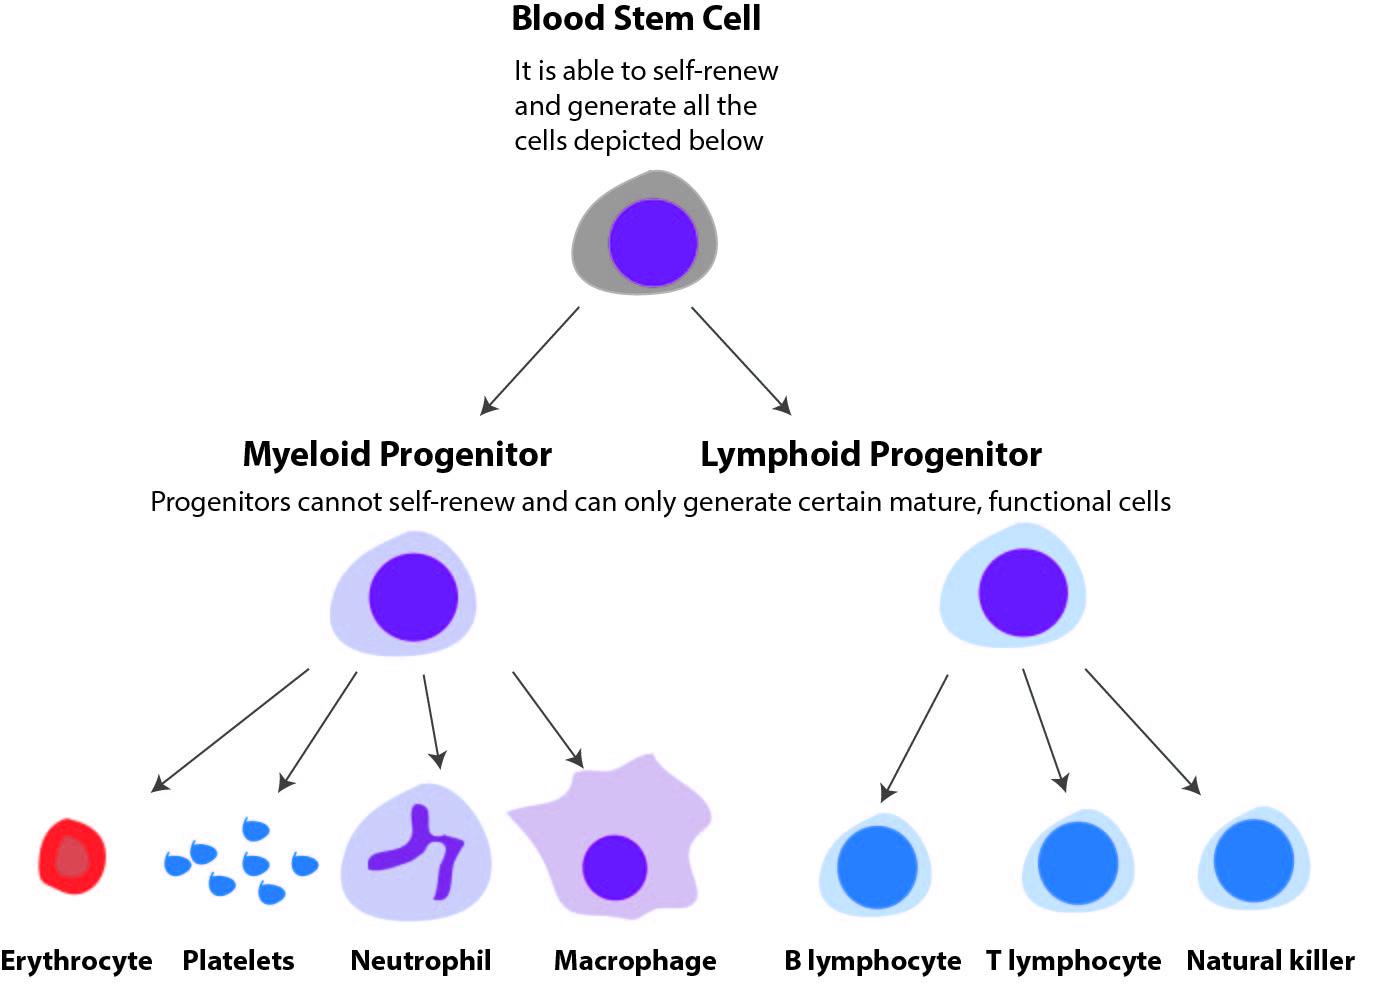 Schematic view of blood cell formation through the hematopoietic hierarchy